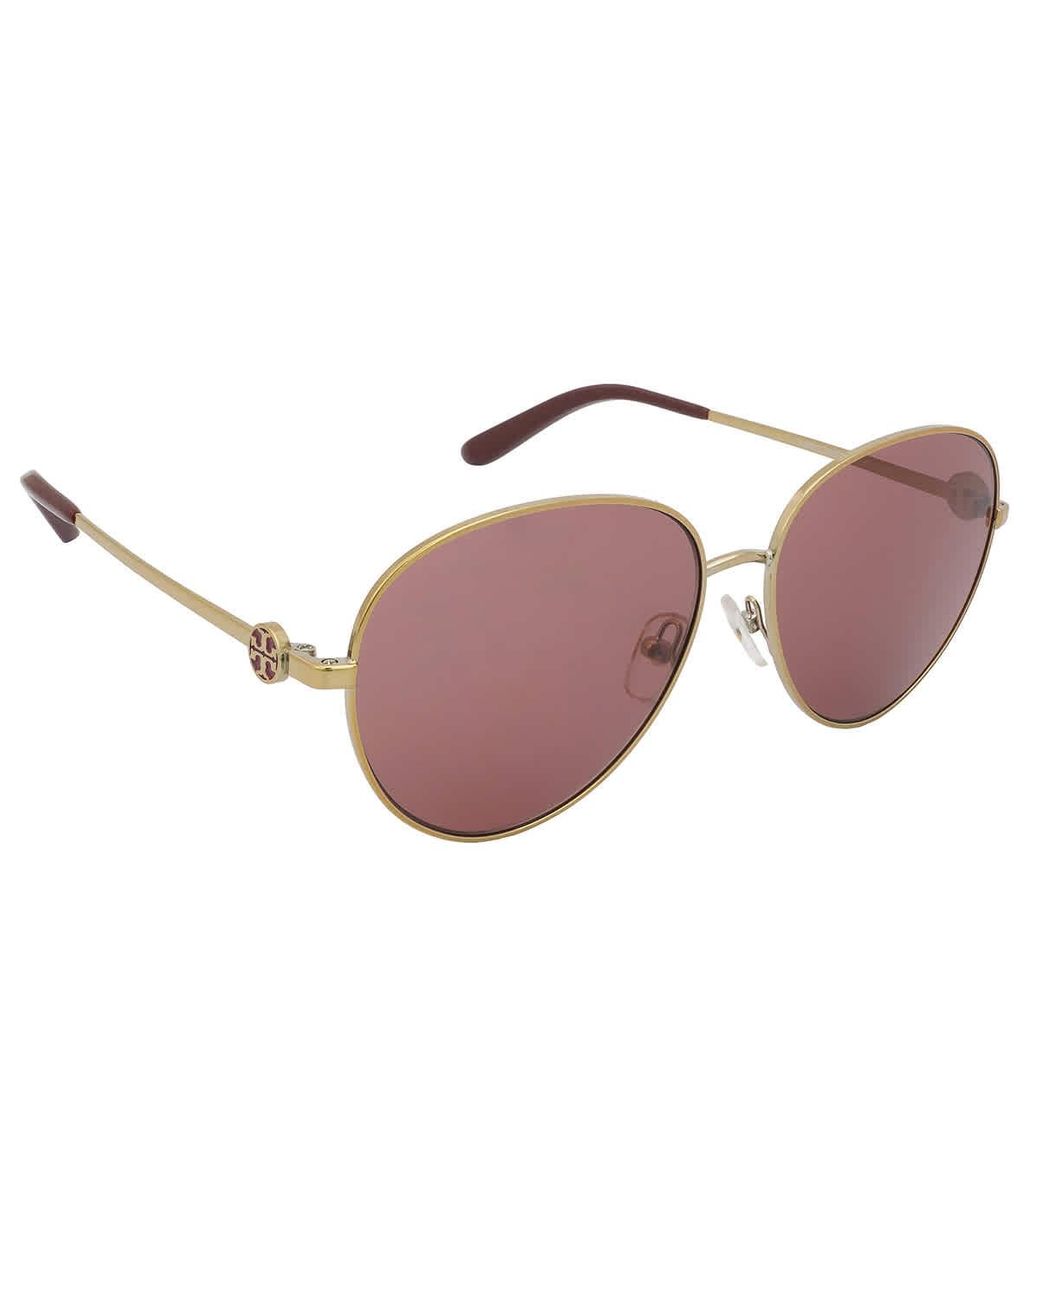 Tory Burch Bordeaux Oval Sunglasses in Brown | Lyst